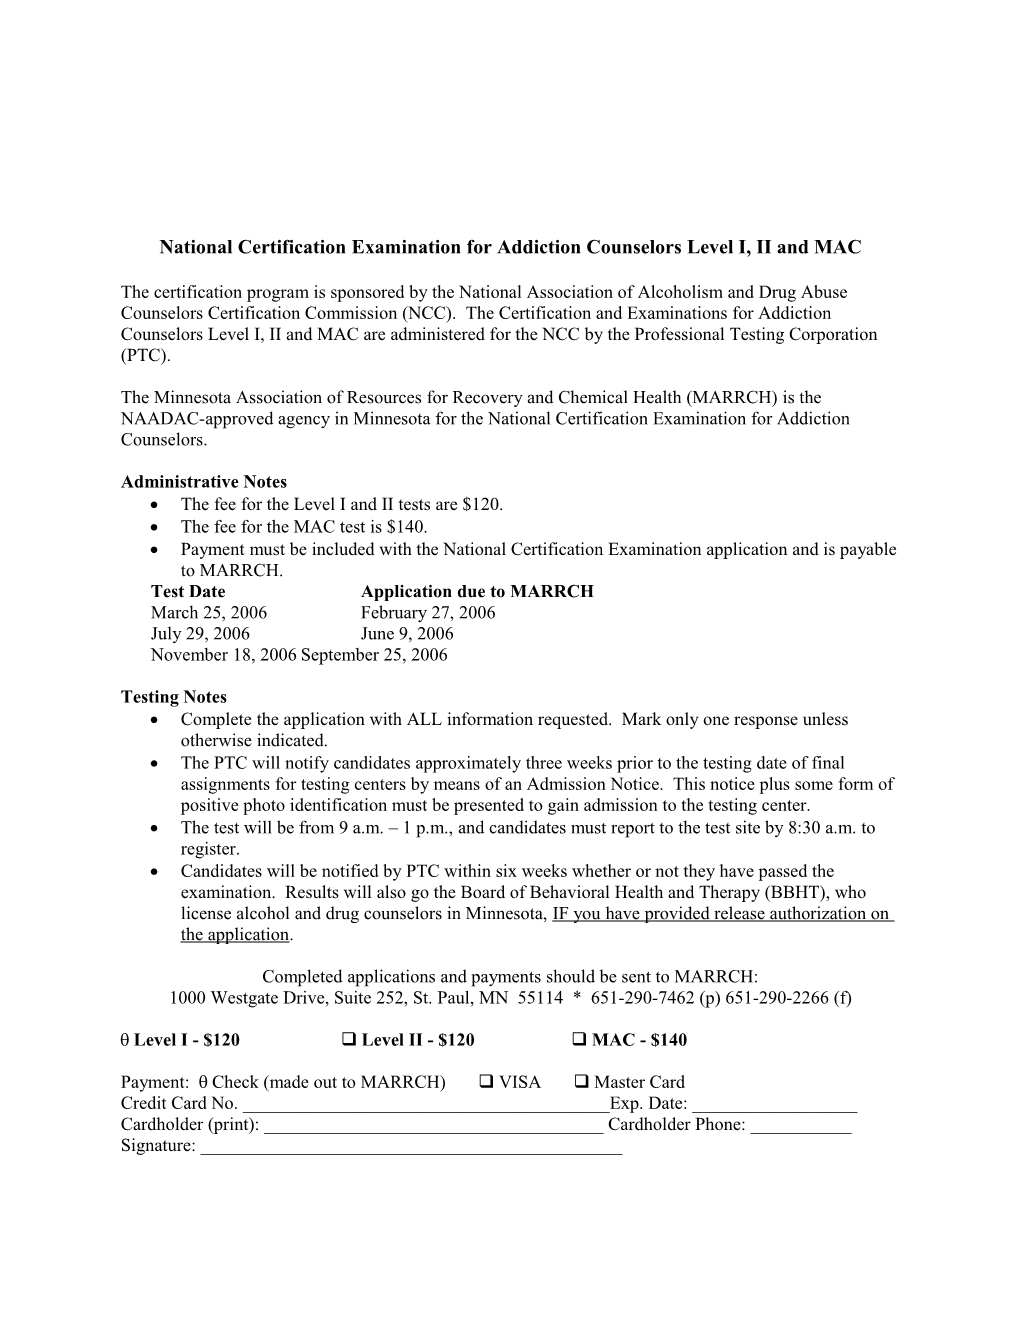 National Certification Examination for Addiction Counselors Level I, II and MAC